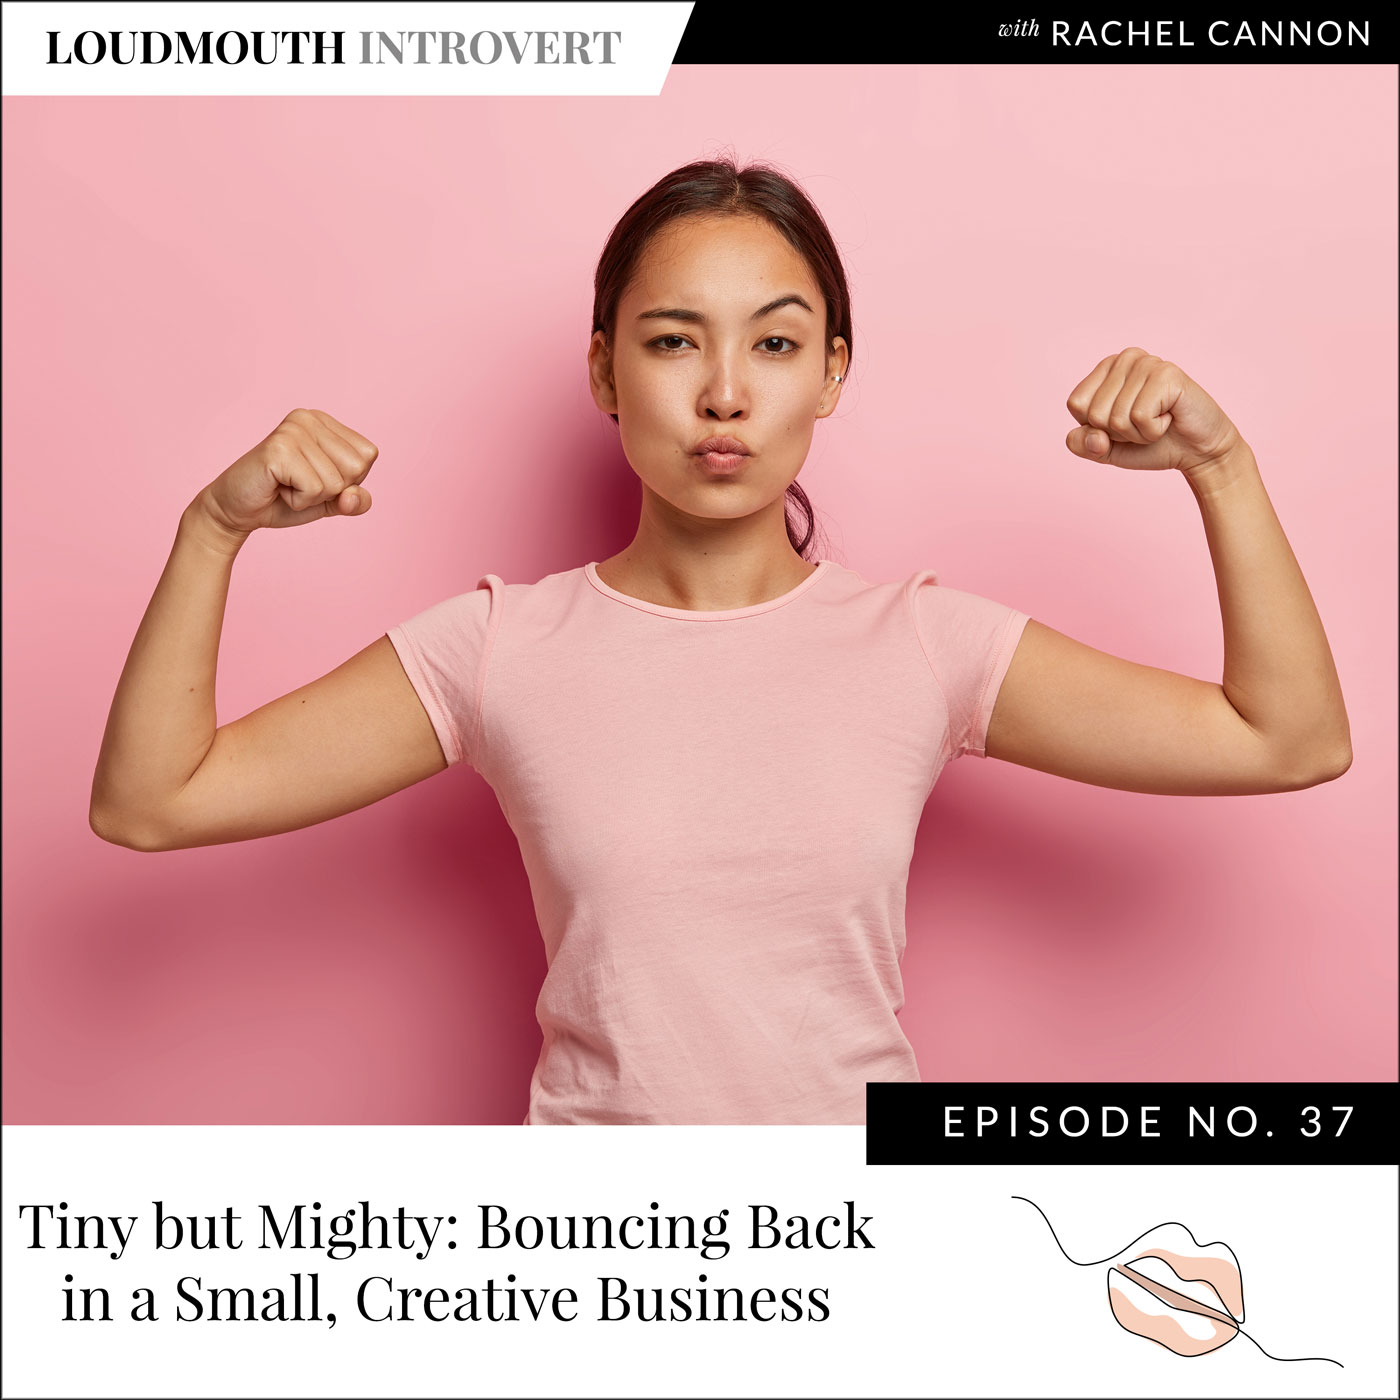 Tiny but Mighty: Bouncing Back in a Small, Creative Business